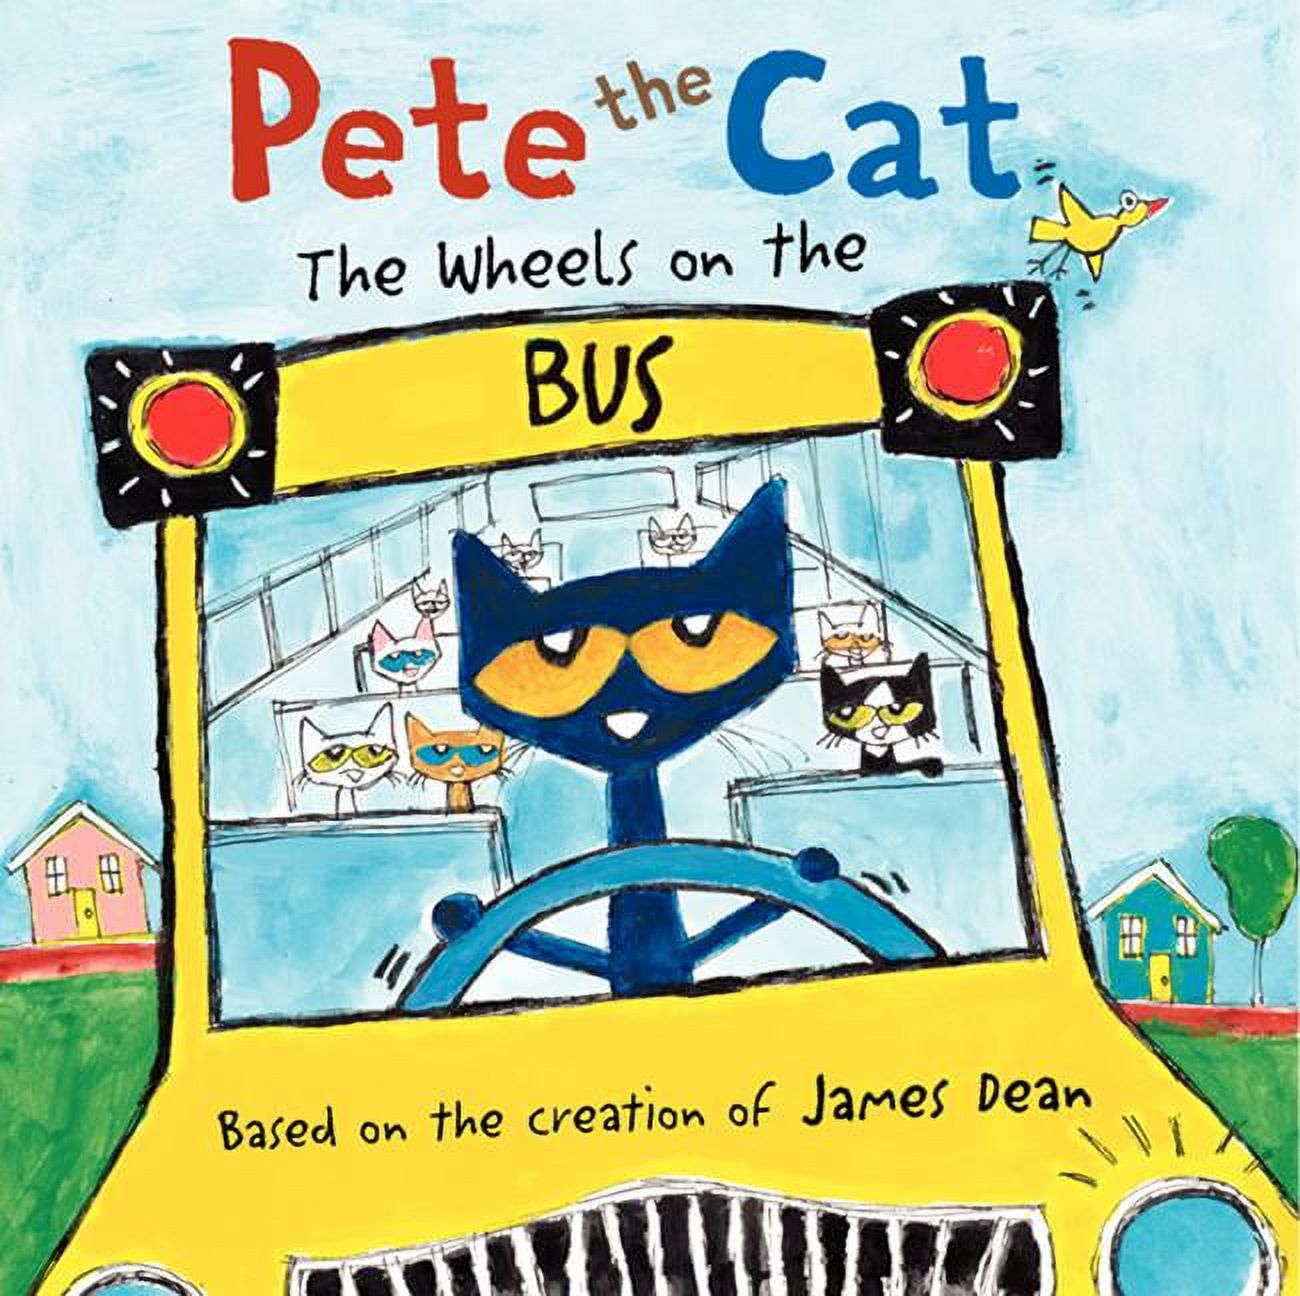 Pete the Cat: Pete the Cat: The Wheels on the Bus (Hardcover) - image 1 of 1